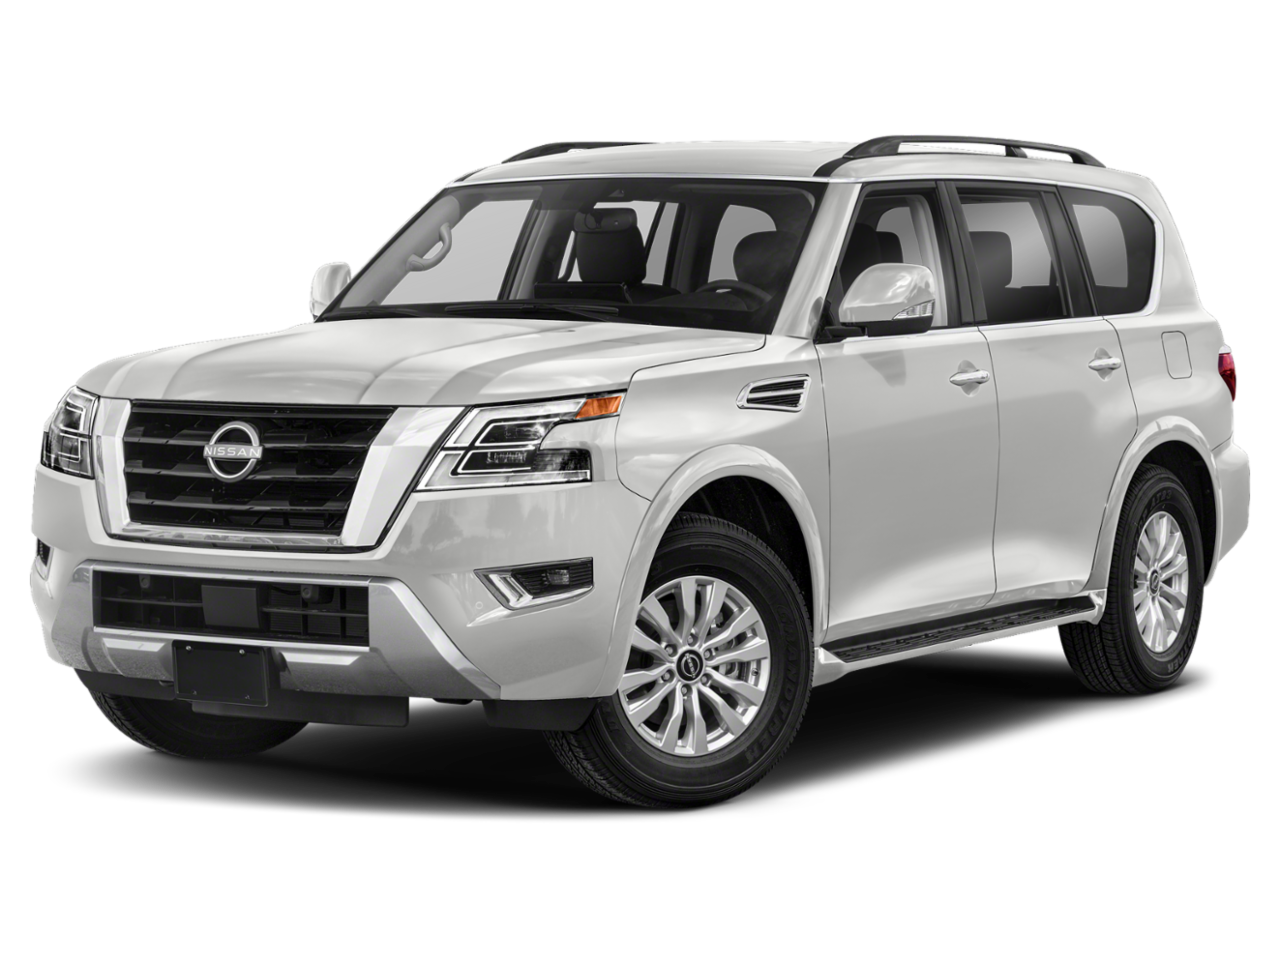 New Nissan Armada from your Greenwood MS dealership, Cannon Nissan of Greenwood.